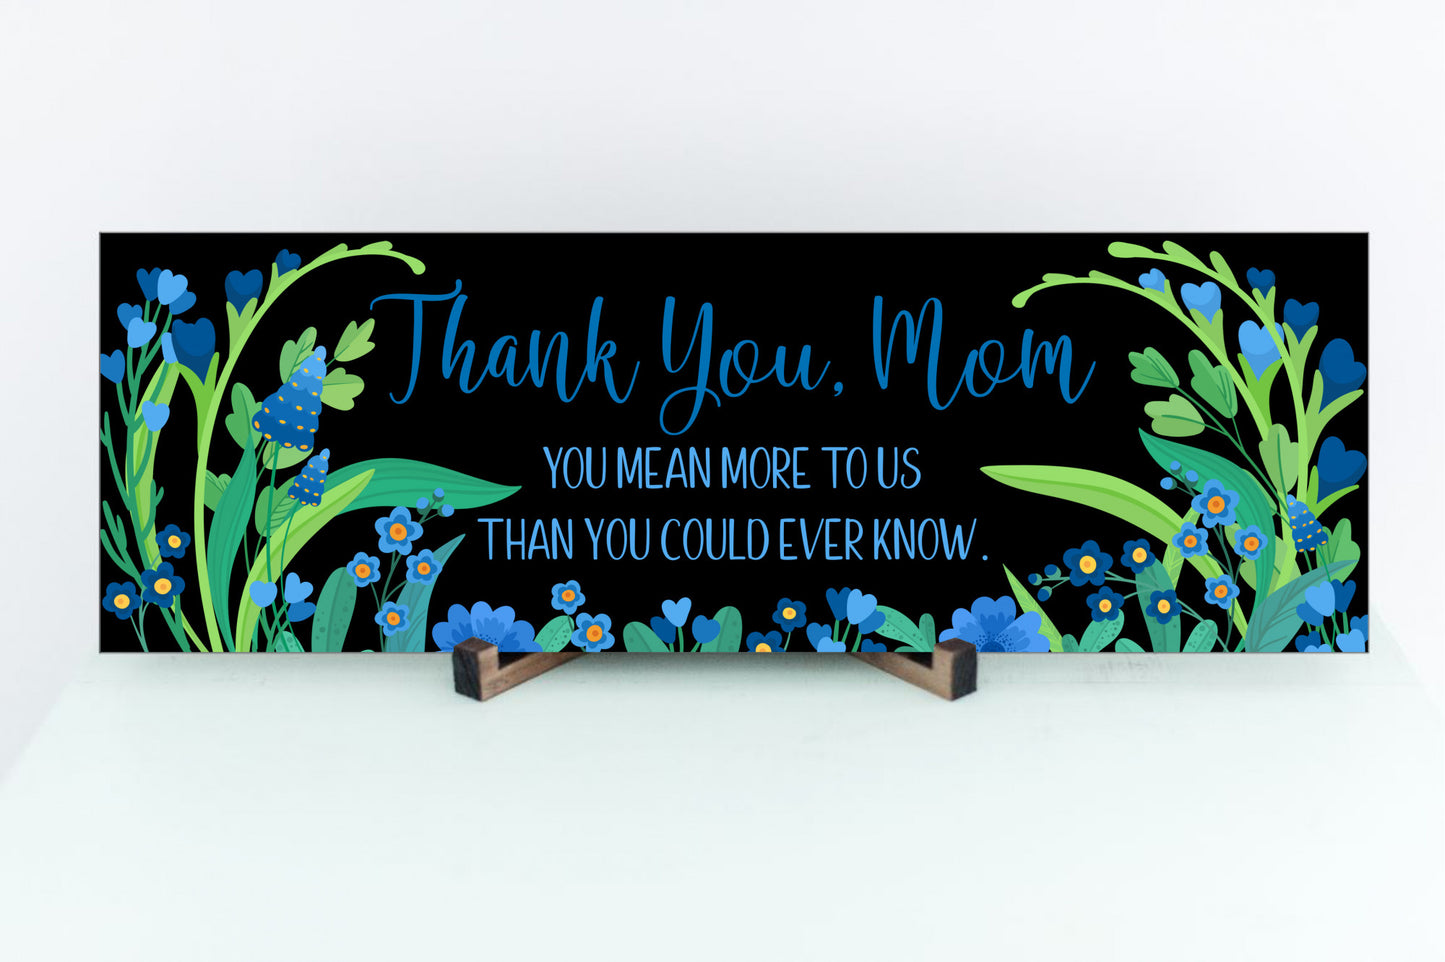 Thank You, Mom / 15x5 Sign for Wall or Shelf / Perfect Gift for Birthday, Mother's Day, Christmas or Any Time!